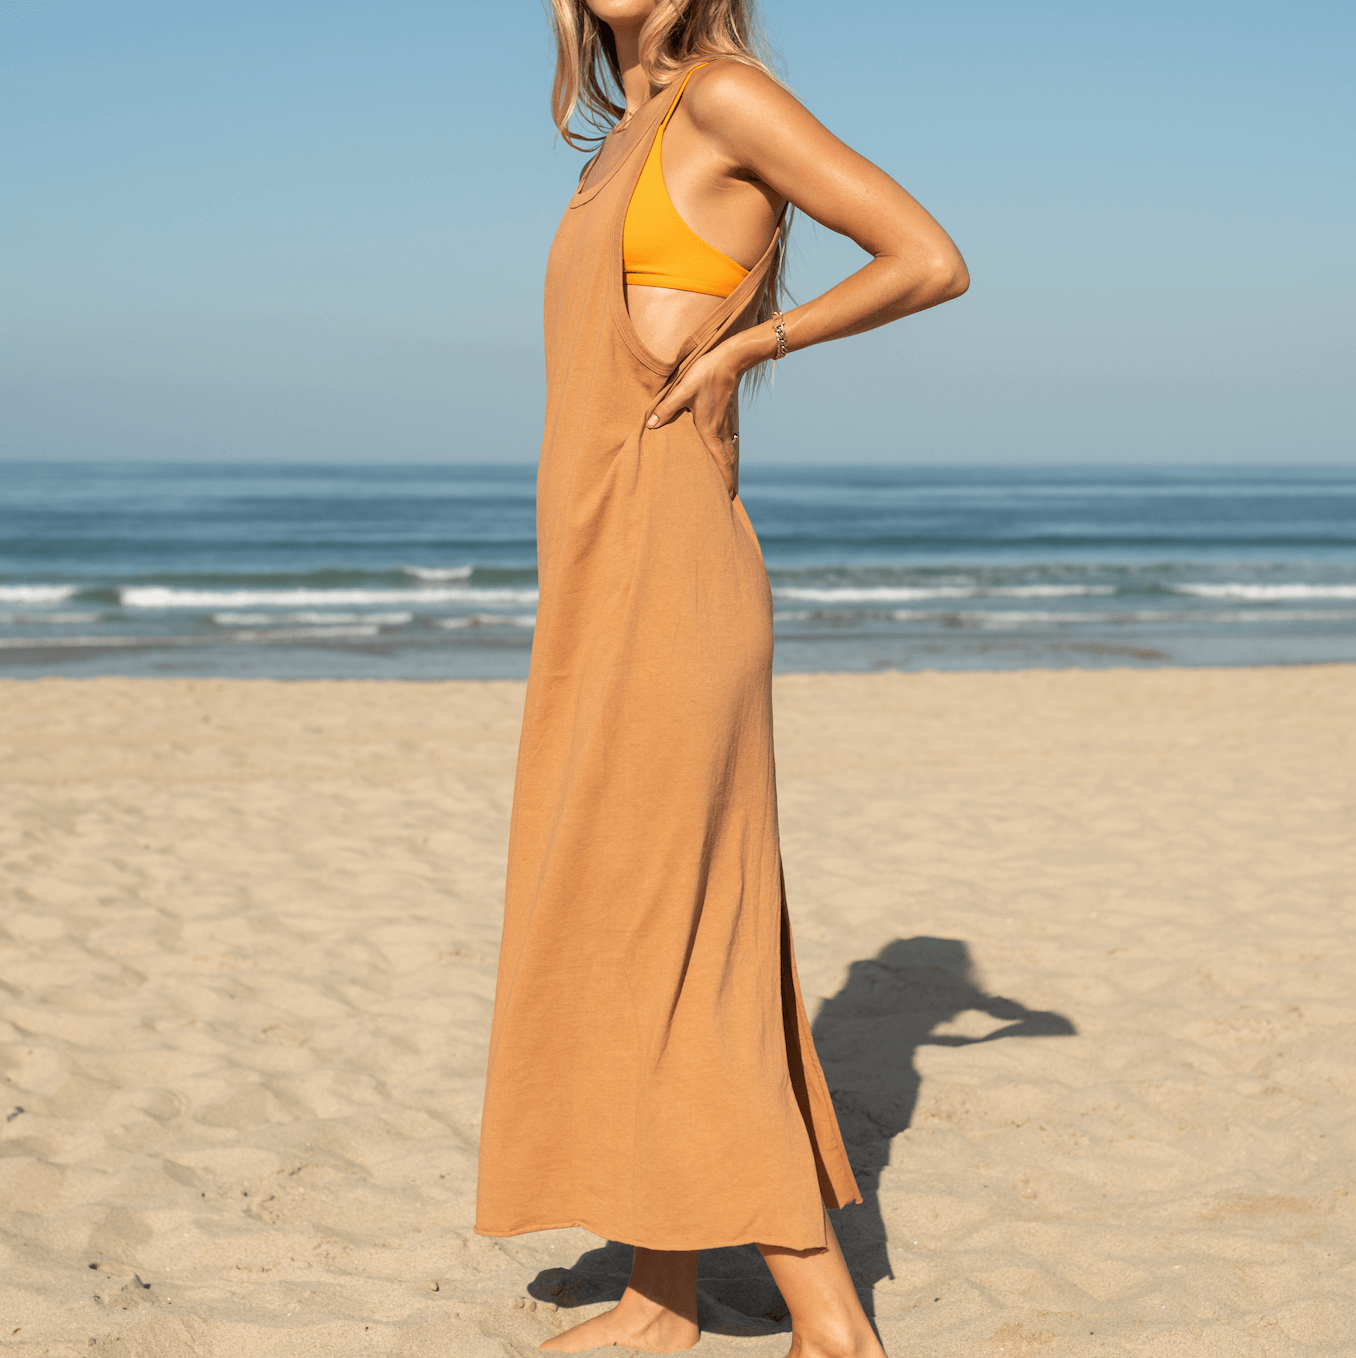 Muscle Dress - Tan Lines (Size S) + Sweet Victory Top - Marigold (Size S)